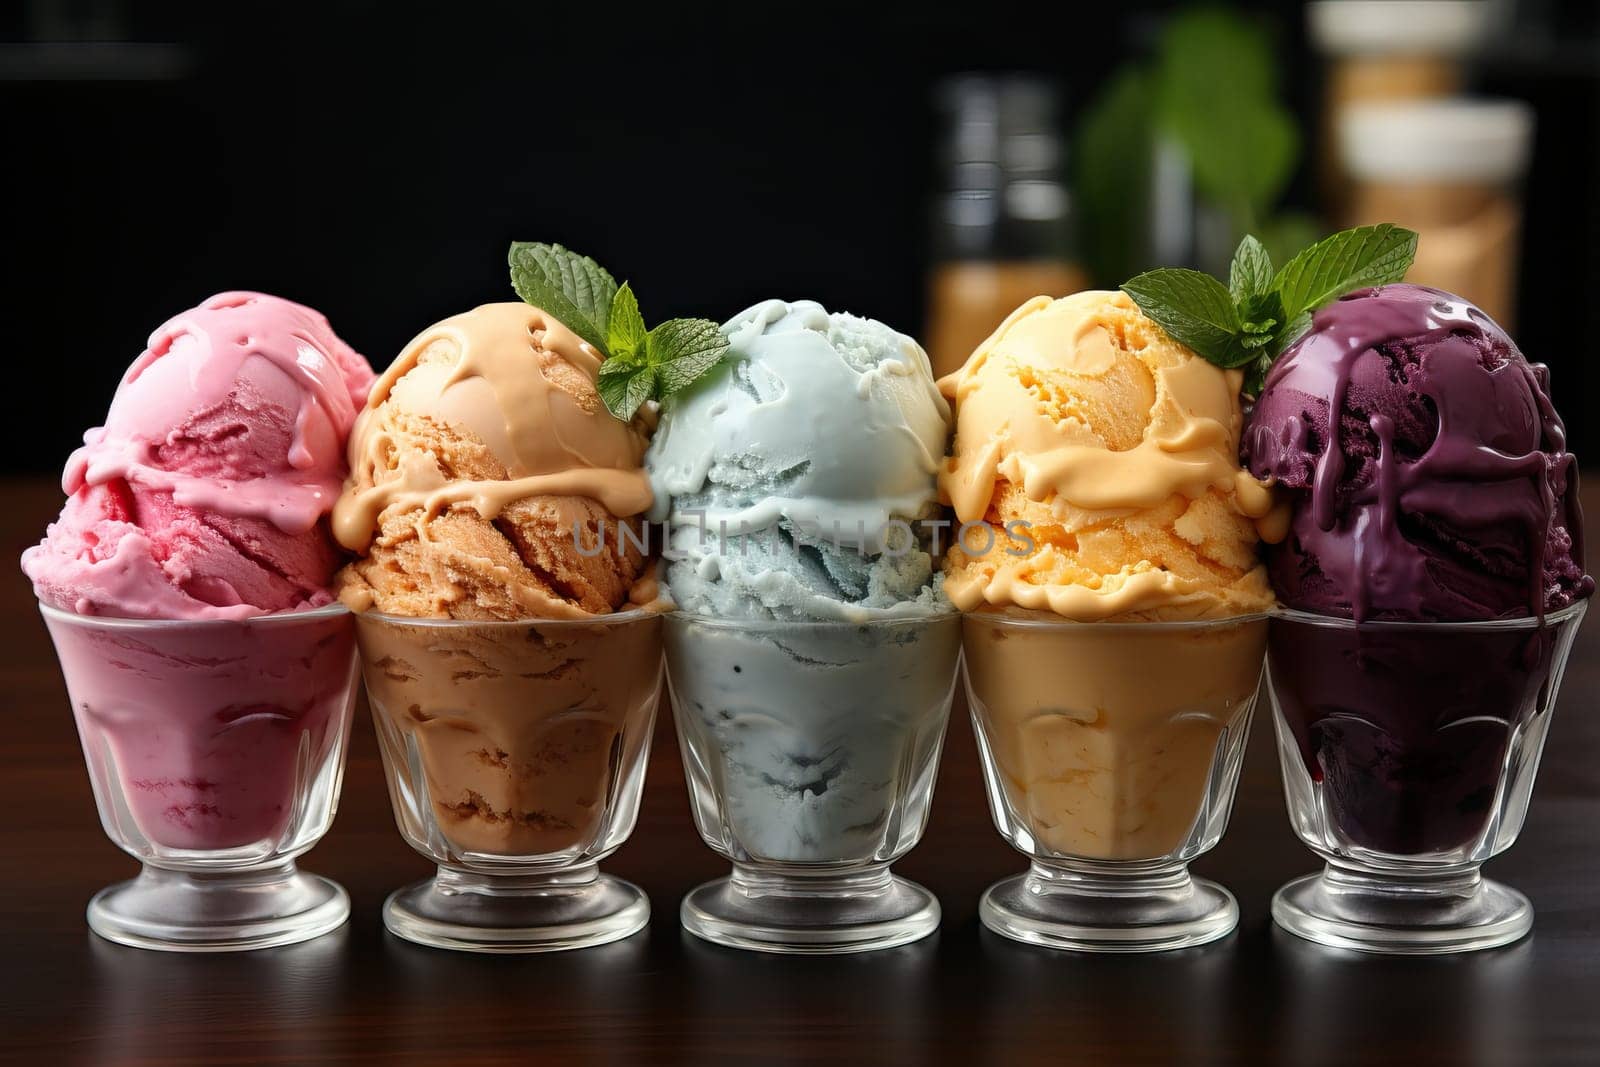 Different flavors of ice cream in glass glasses, serving ice cream in a cafe.